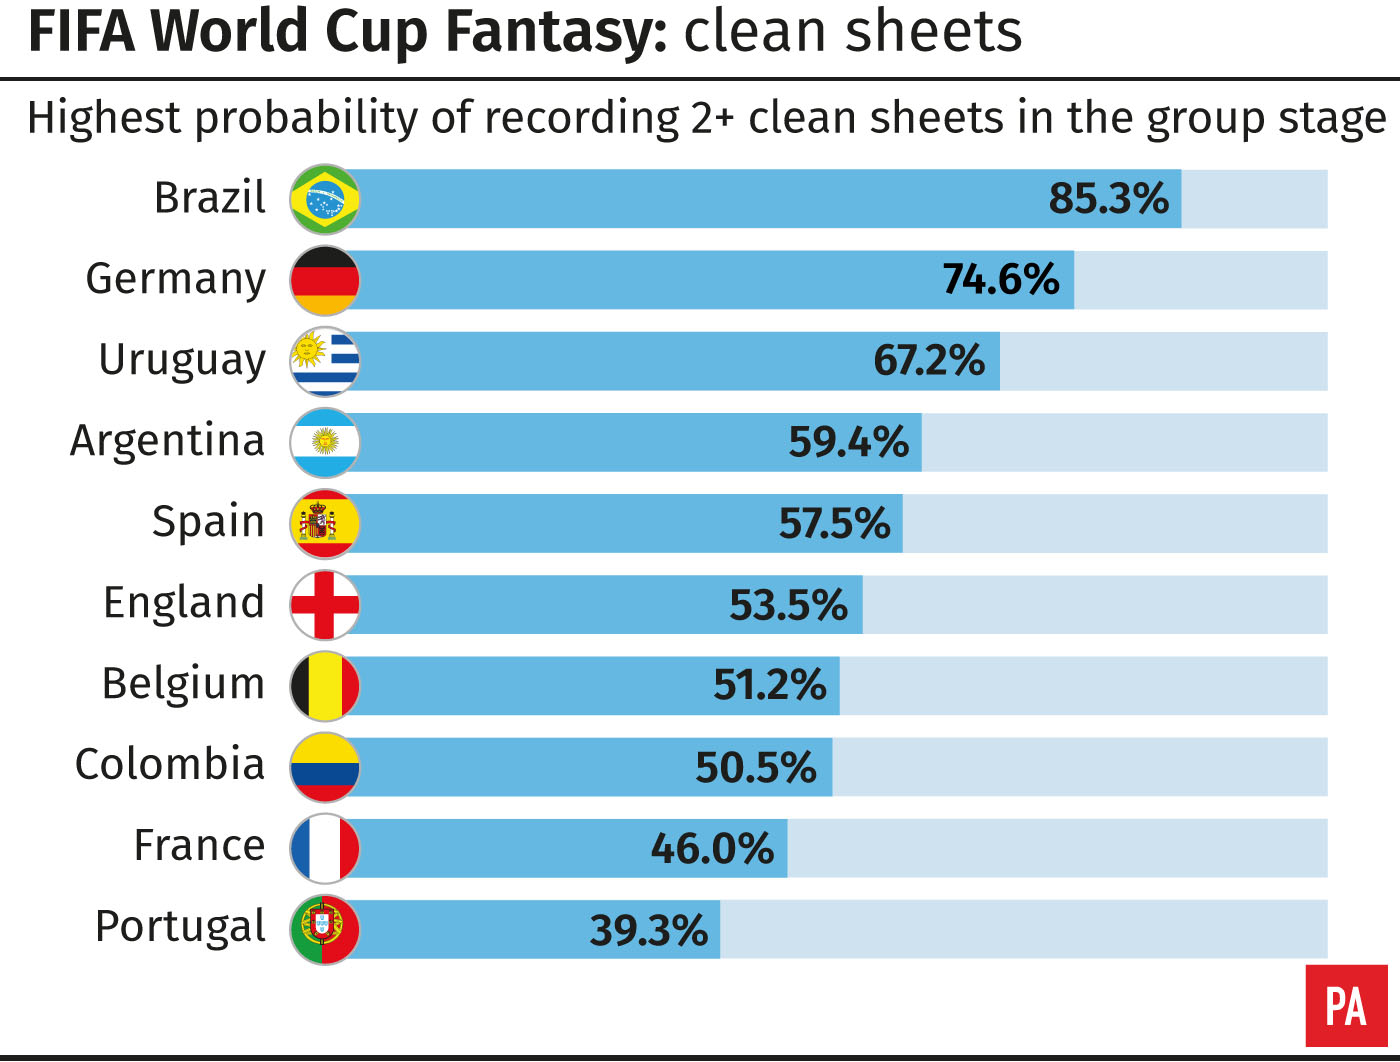 The predicted likelihood that teams at the 2018 World Cup will keep two or more clean sheets at the group stage